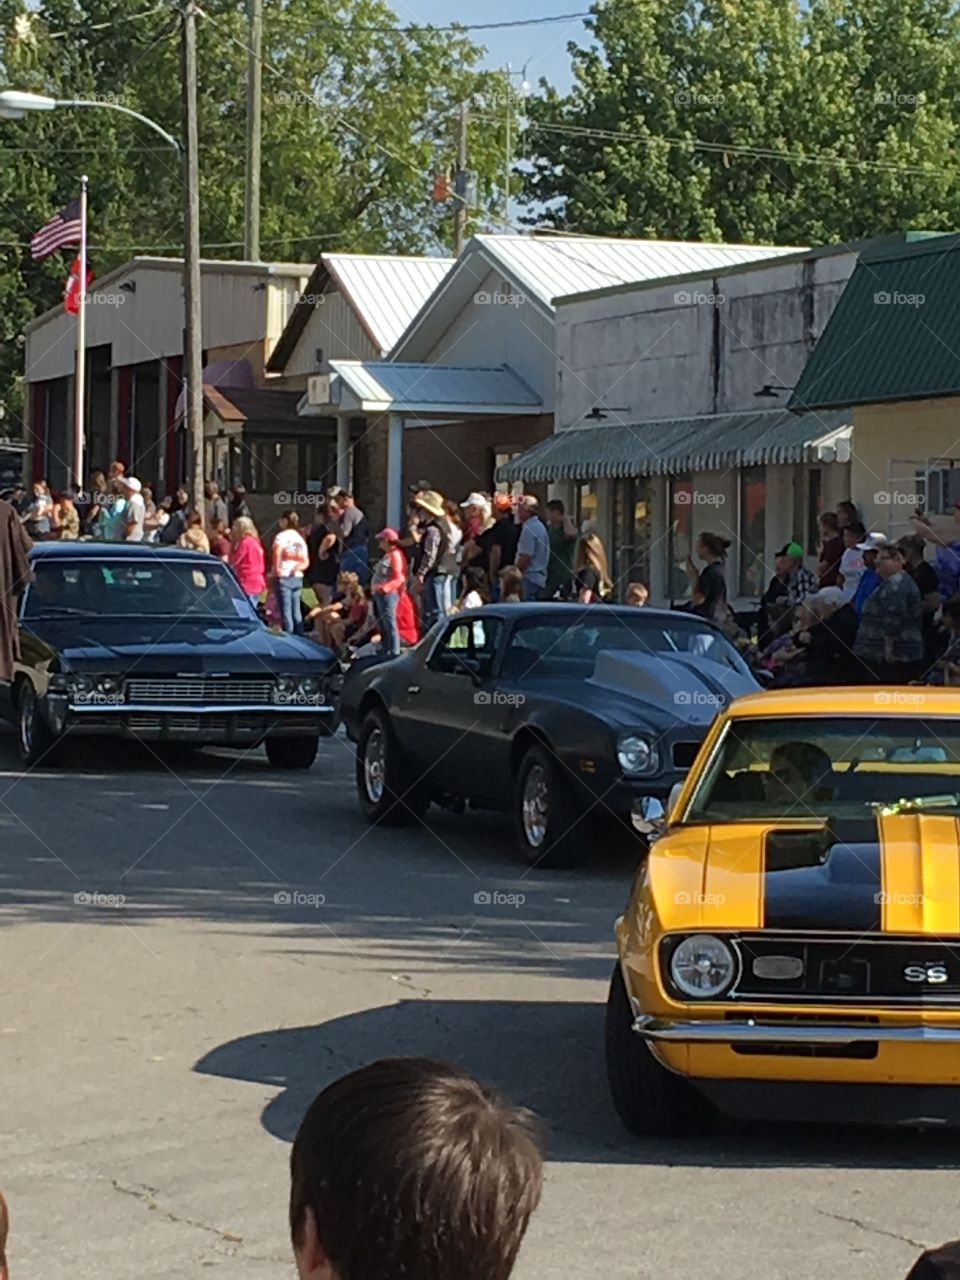 Apple festival parade here comes the sweet cars. Vroom vroom putt putt around the corner they go!